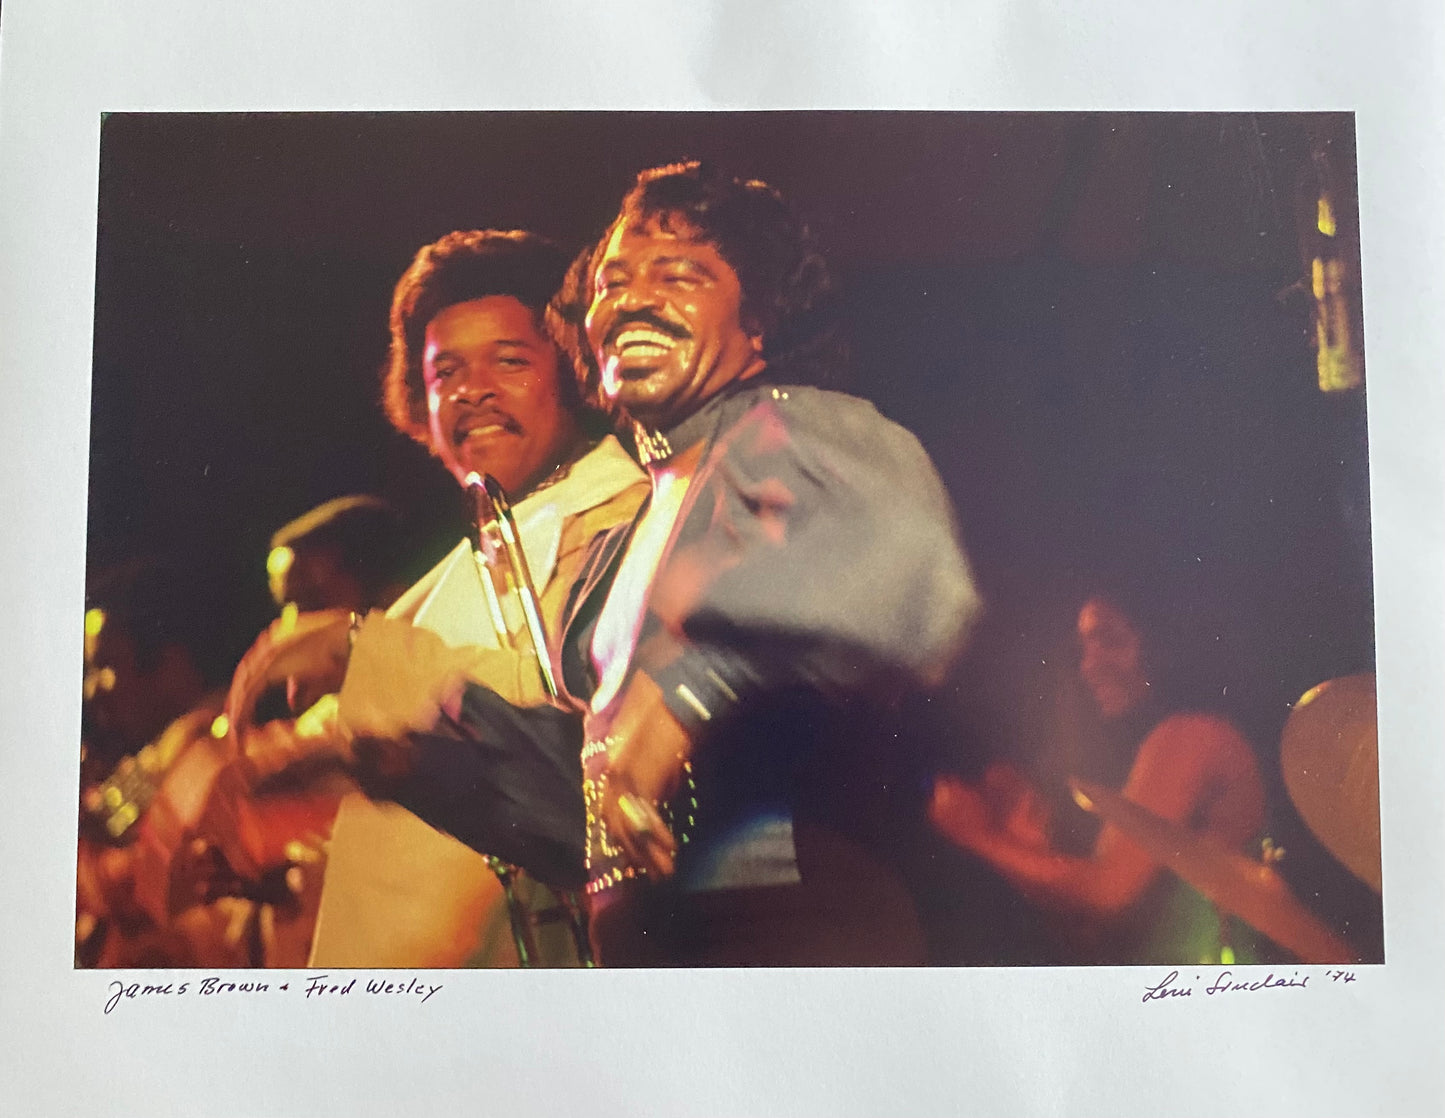 James Brown / Fred Wesley Photo by Leni Sinclair